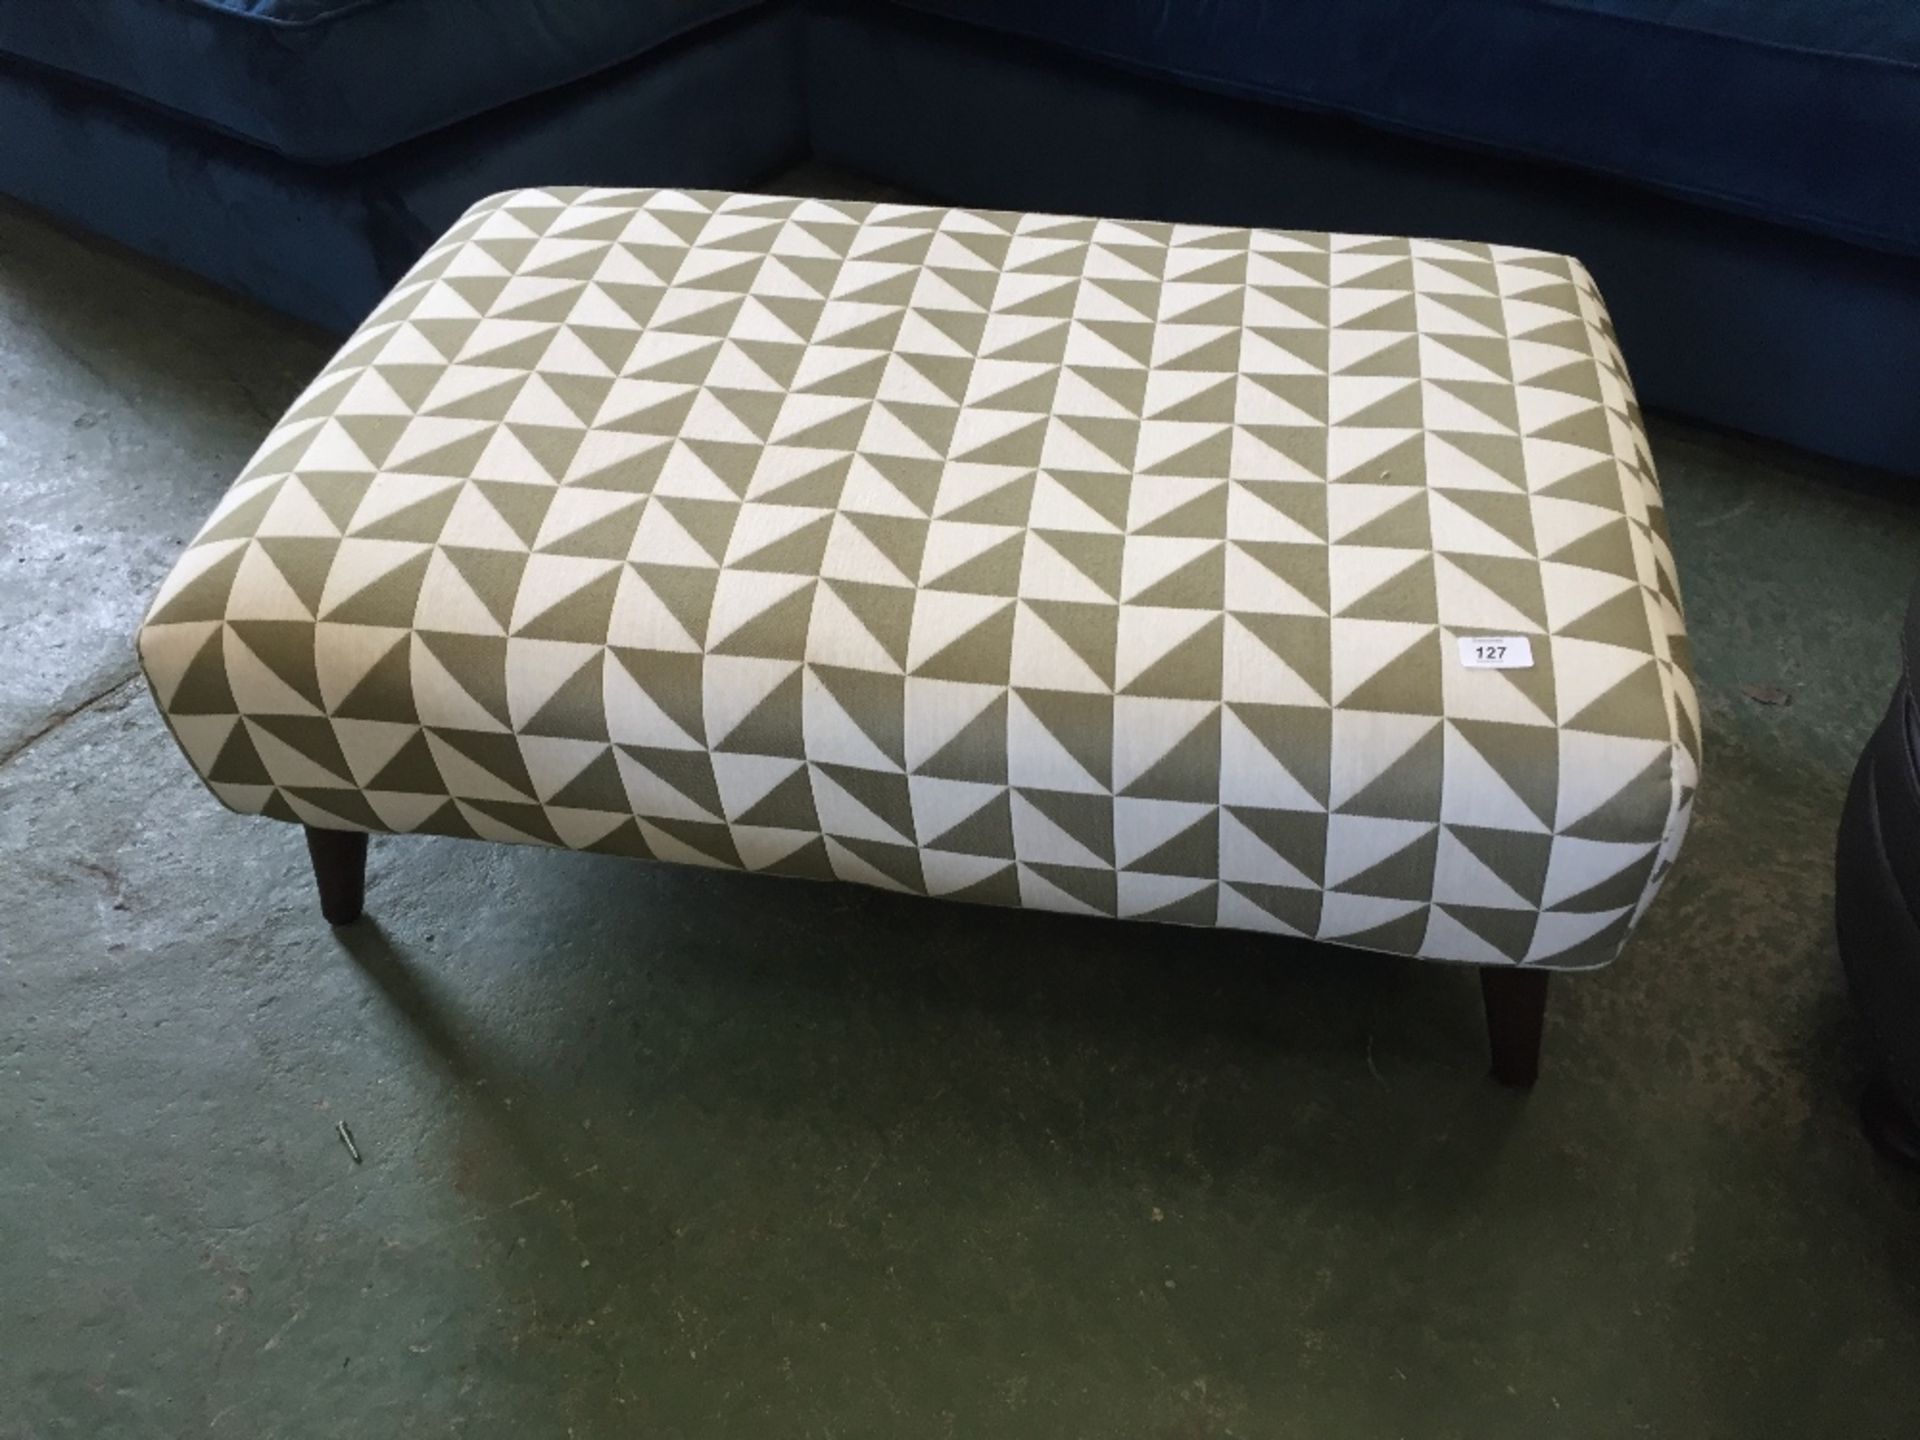 GREEN AND WHITE PATTERNED FOOTSTOOL